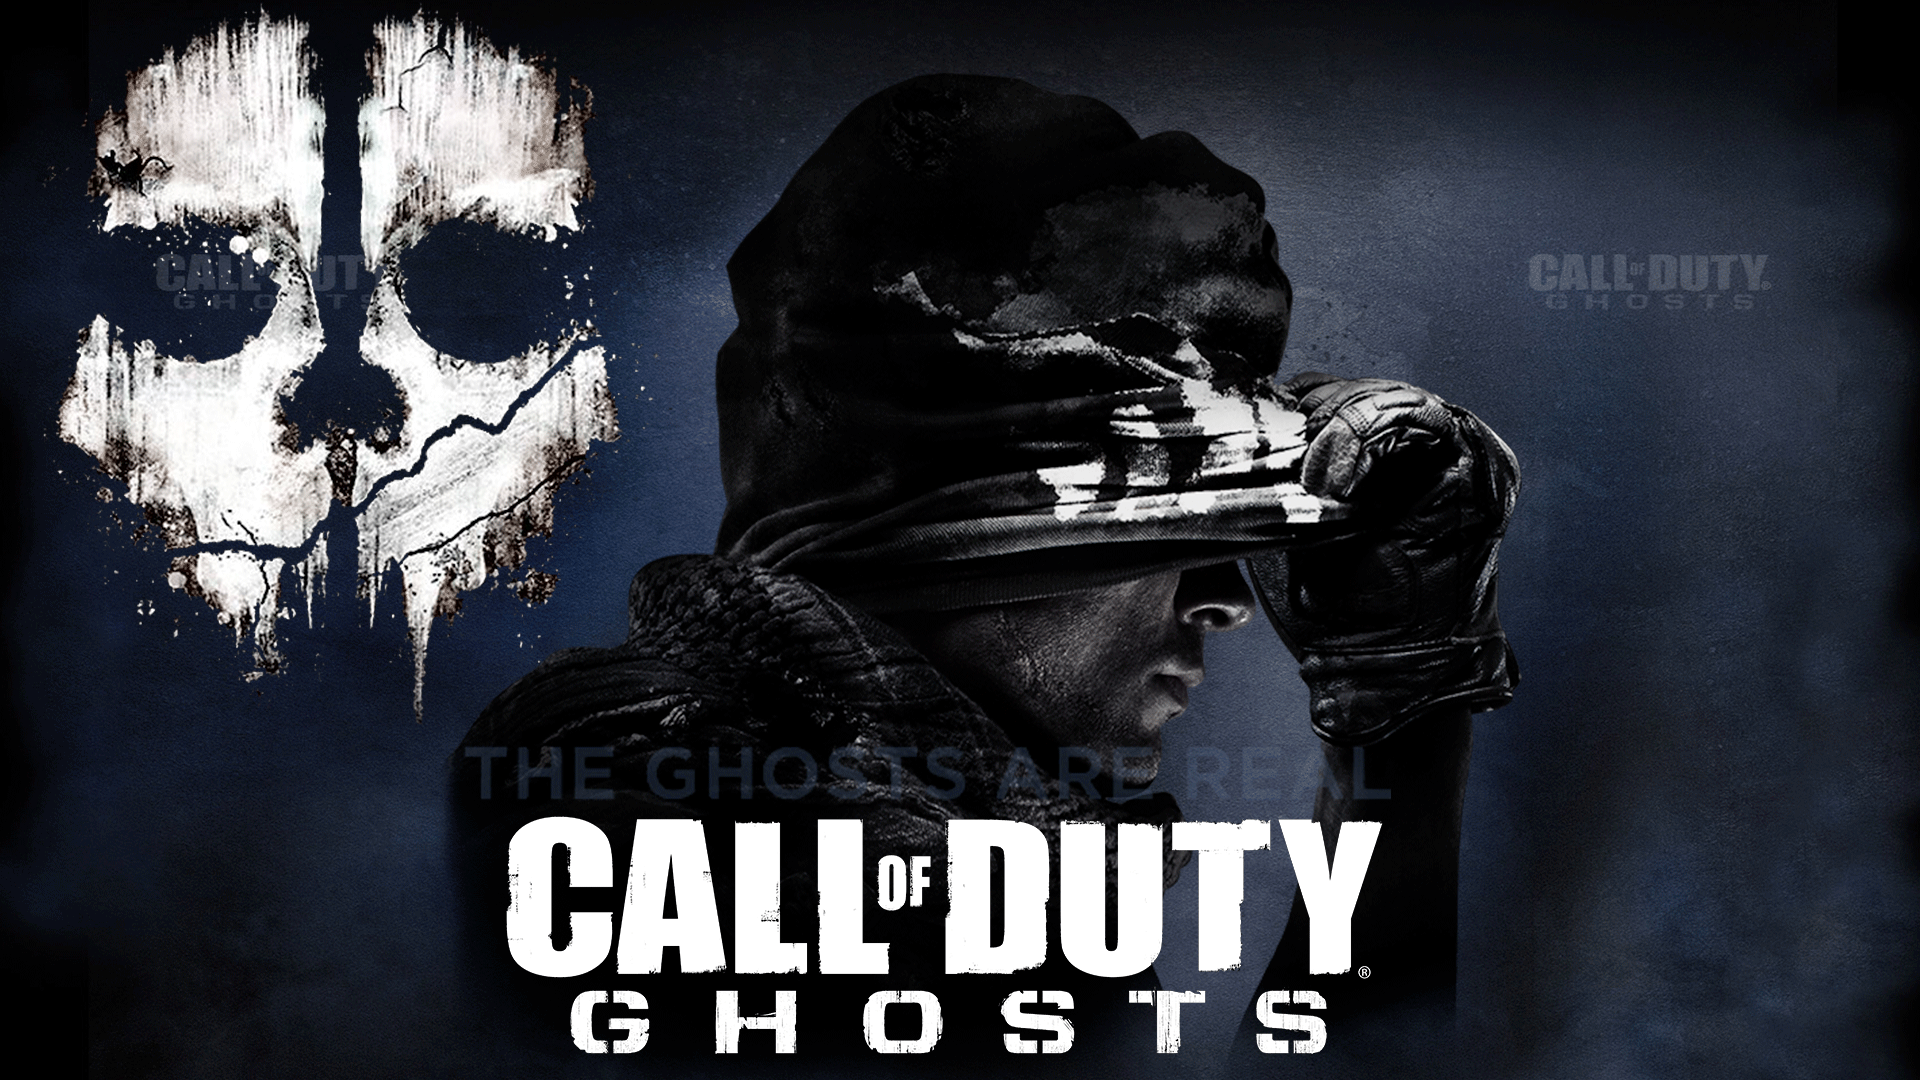 Call of Duty Ghosts Wallpaper. Call of Duty: Ghosts